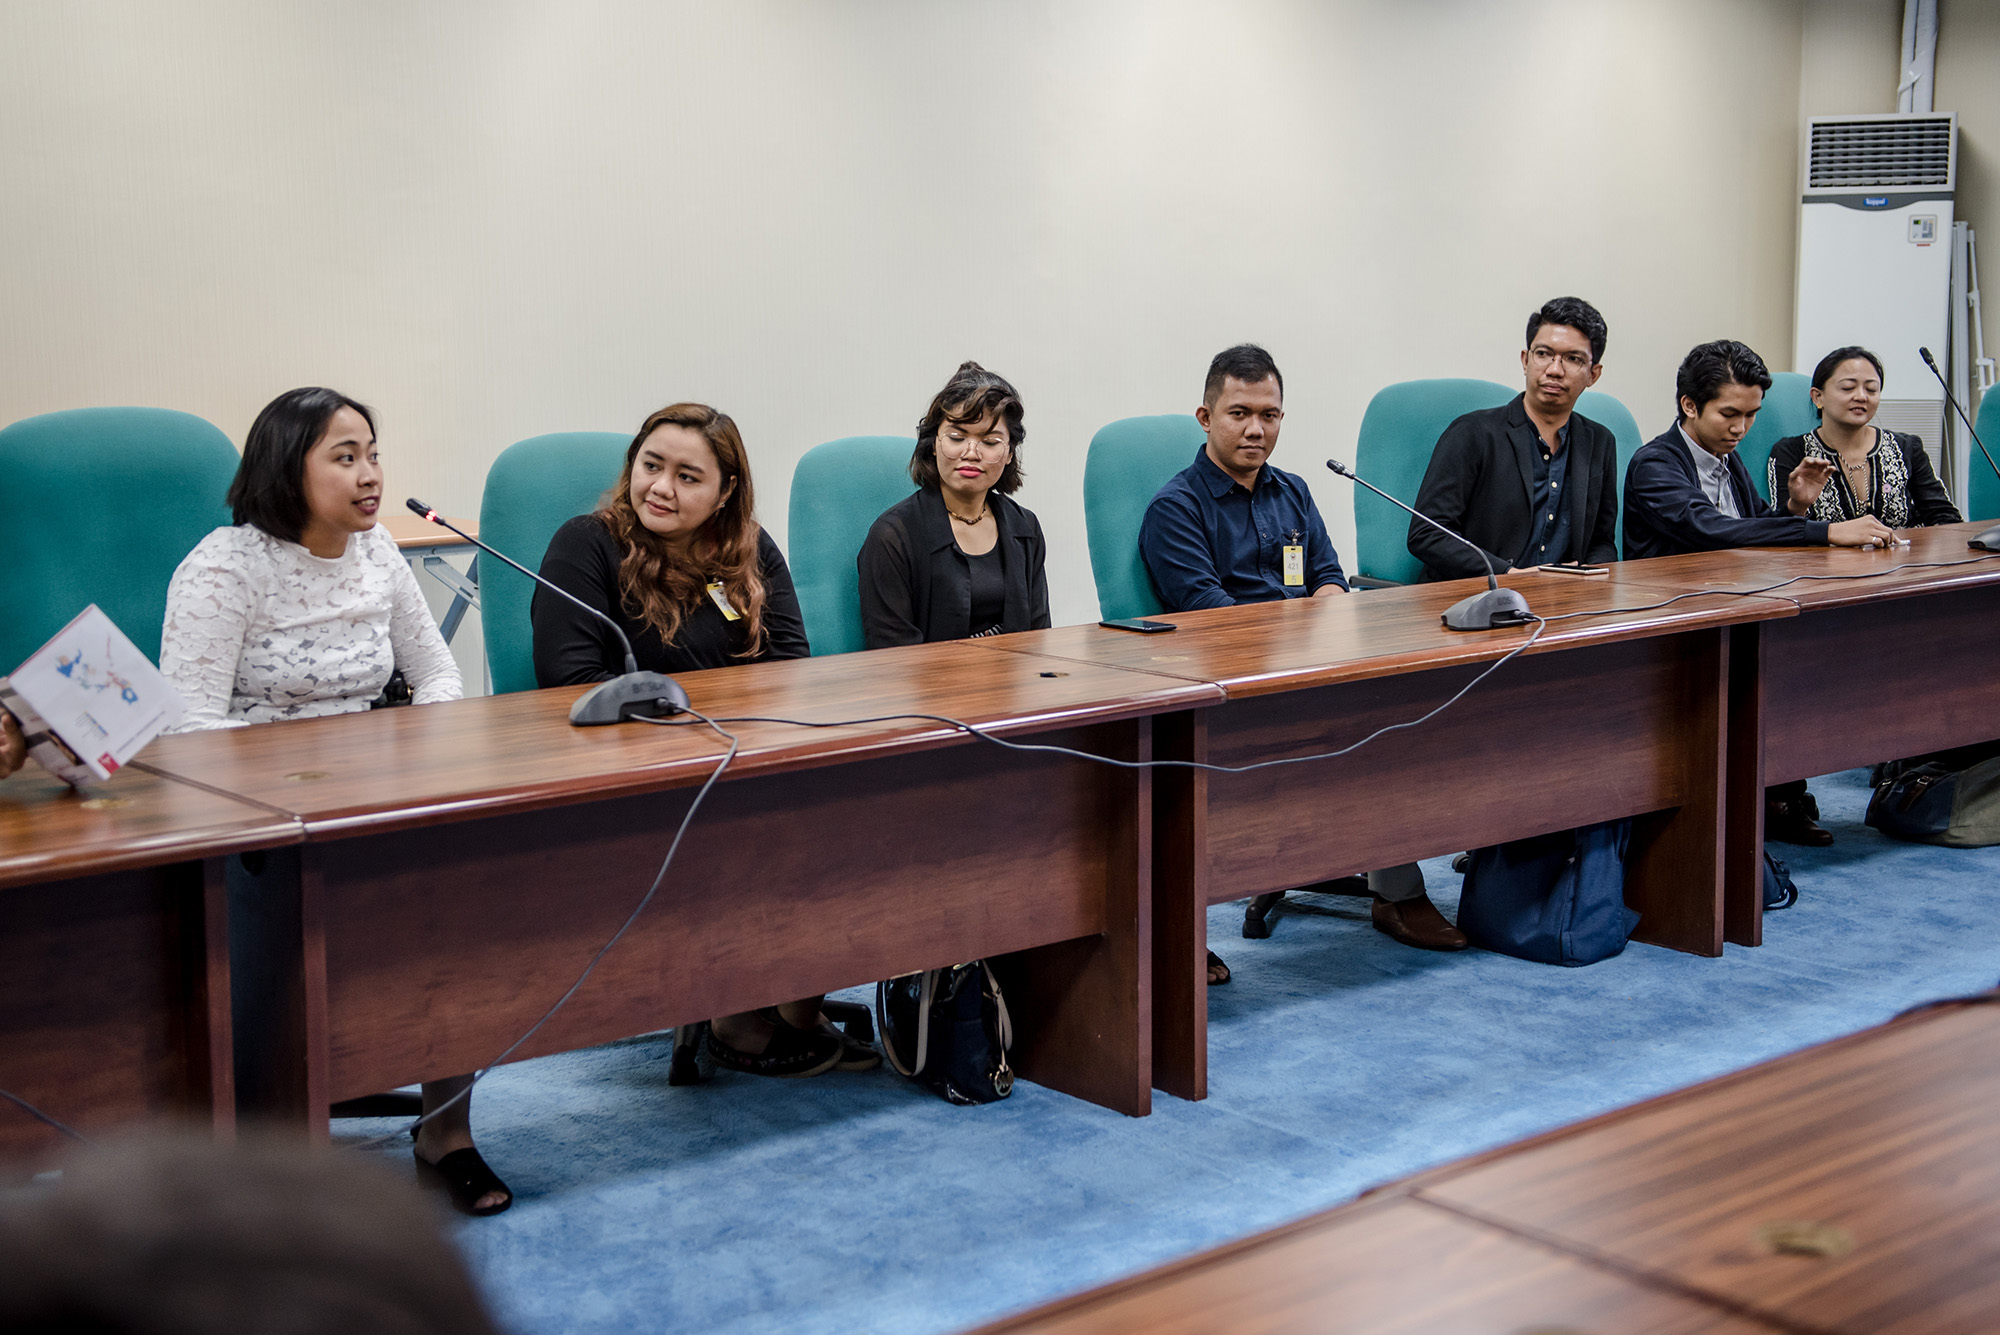 Teach for the Philippines Alumni working in education reform, specifically in program and policymaking in the Department of Education, the Commission on Higher Education, and the Senate Offices